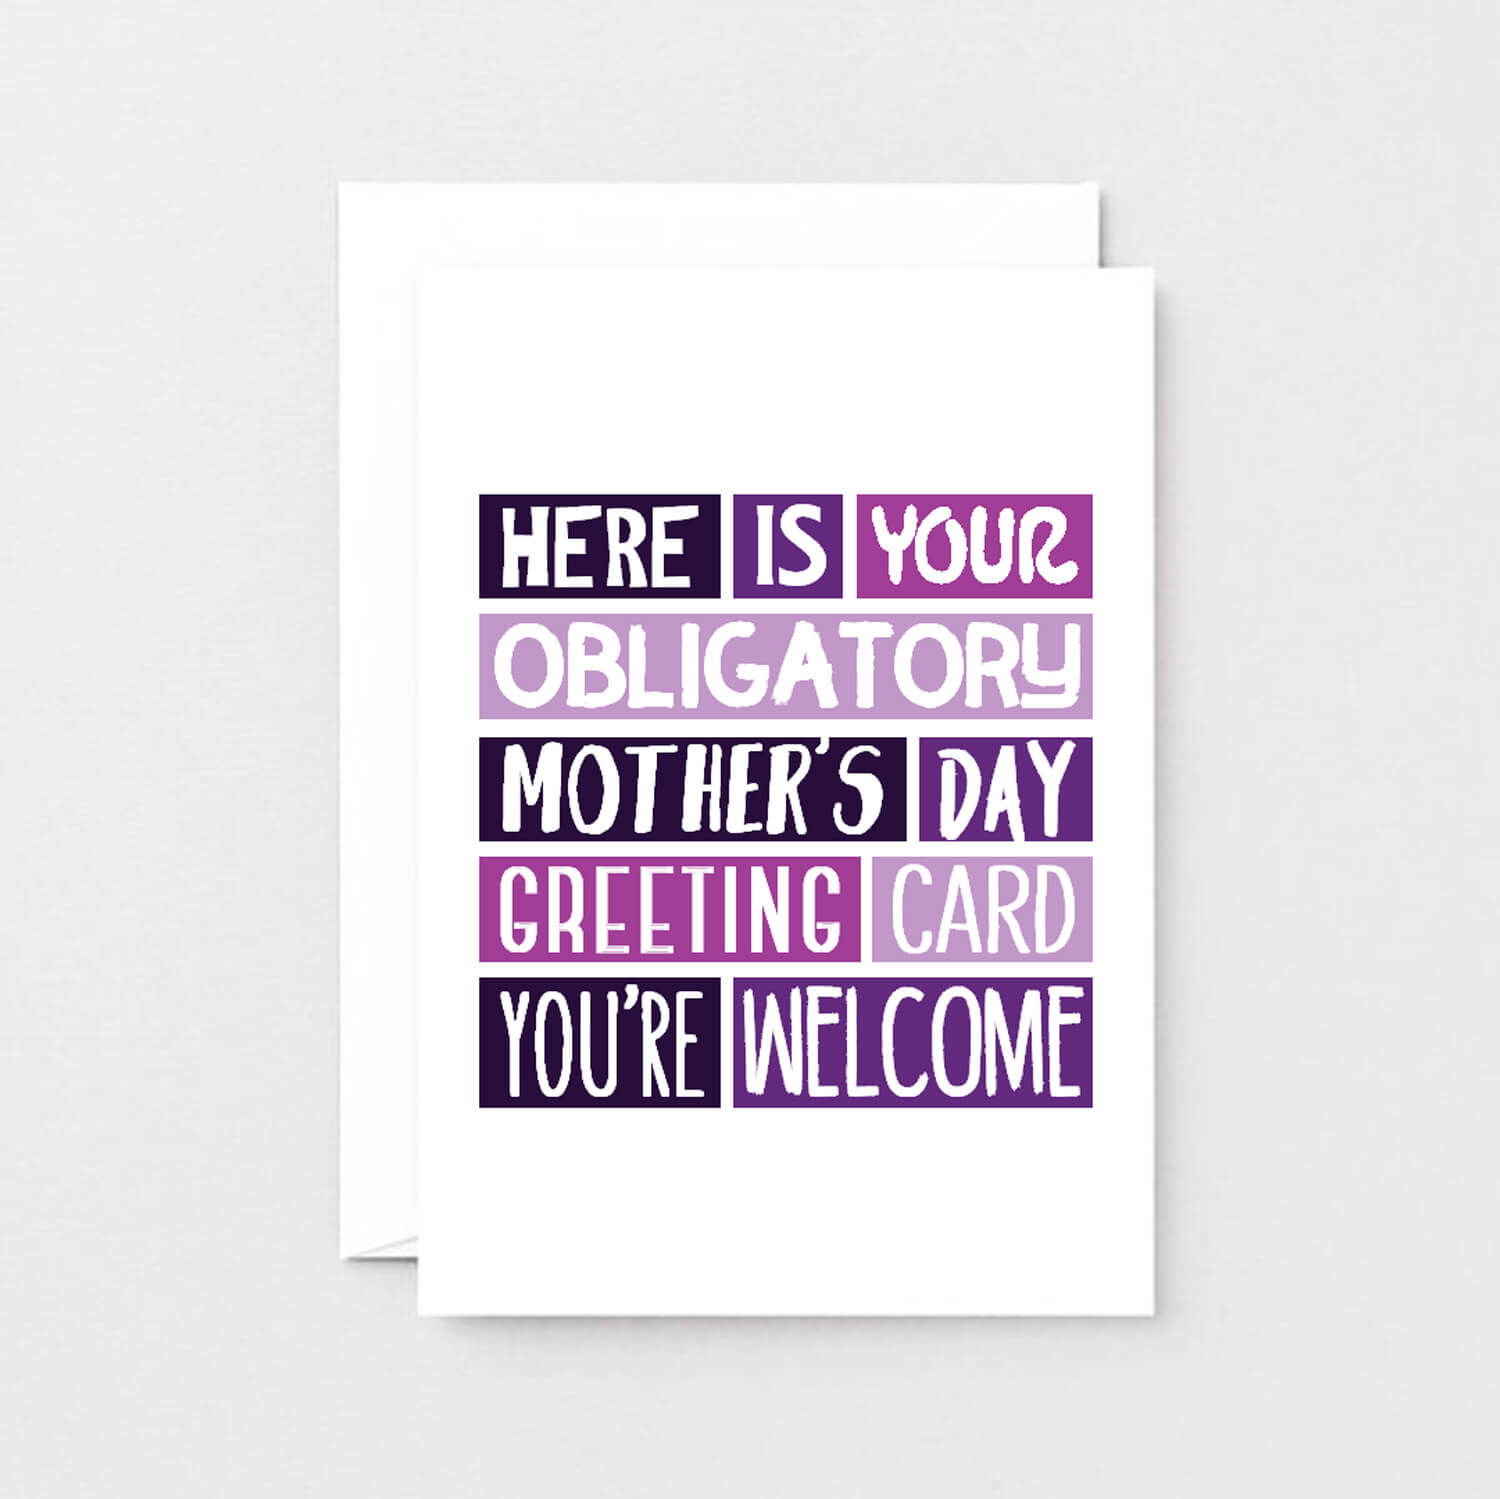 Funny Mother's Day Card by SixElevenCreations. Reads Here is your obligatory Mother's Day greeting card. You're welcome. Product Code SEM0006A6